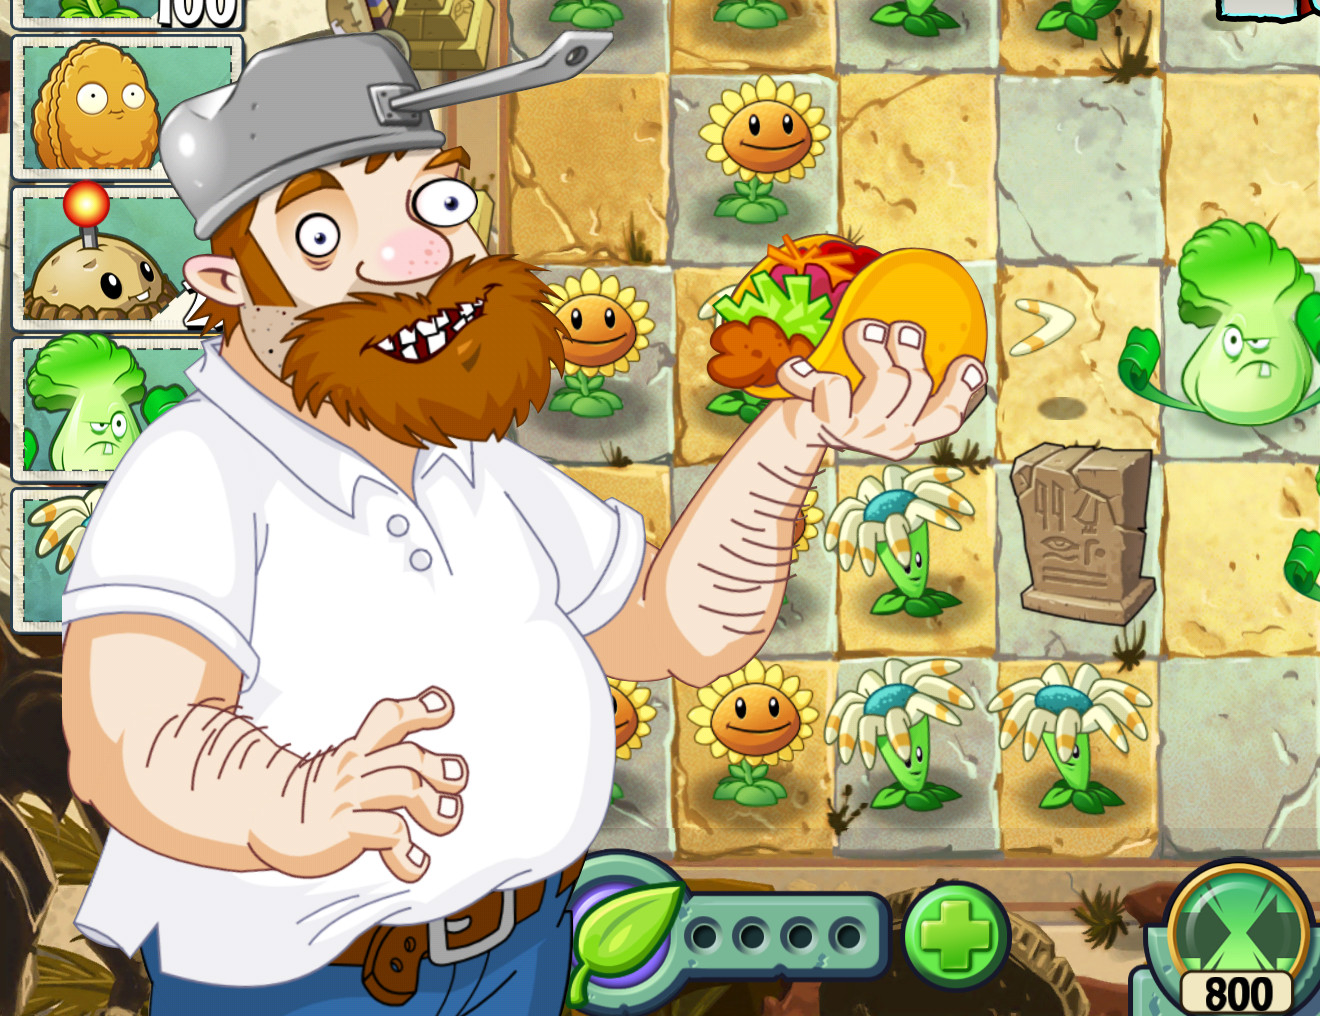 Plants vs. Zombies 2 iOS, iPad, Android, AndroidTab game - Mod DB